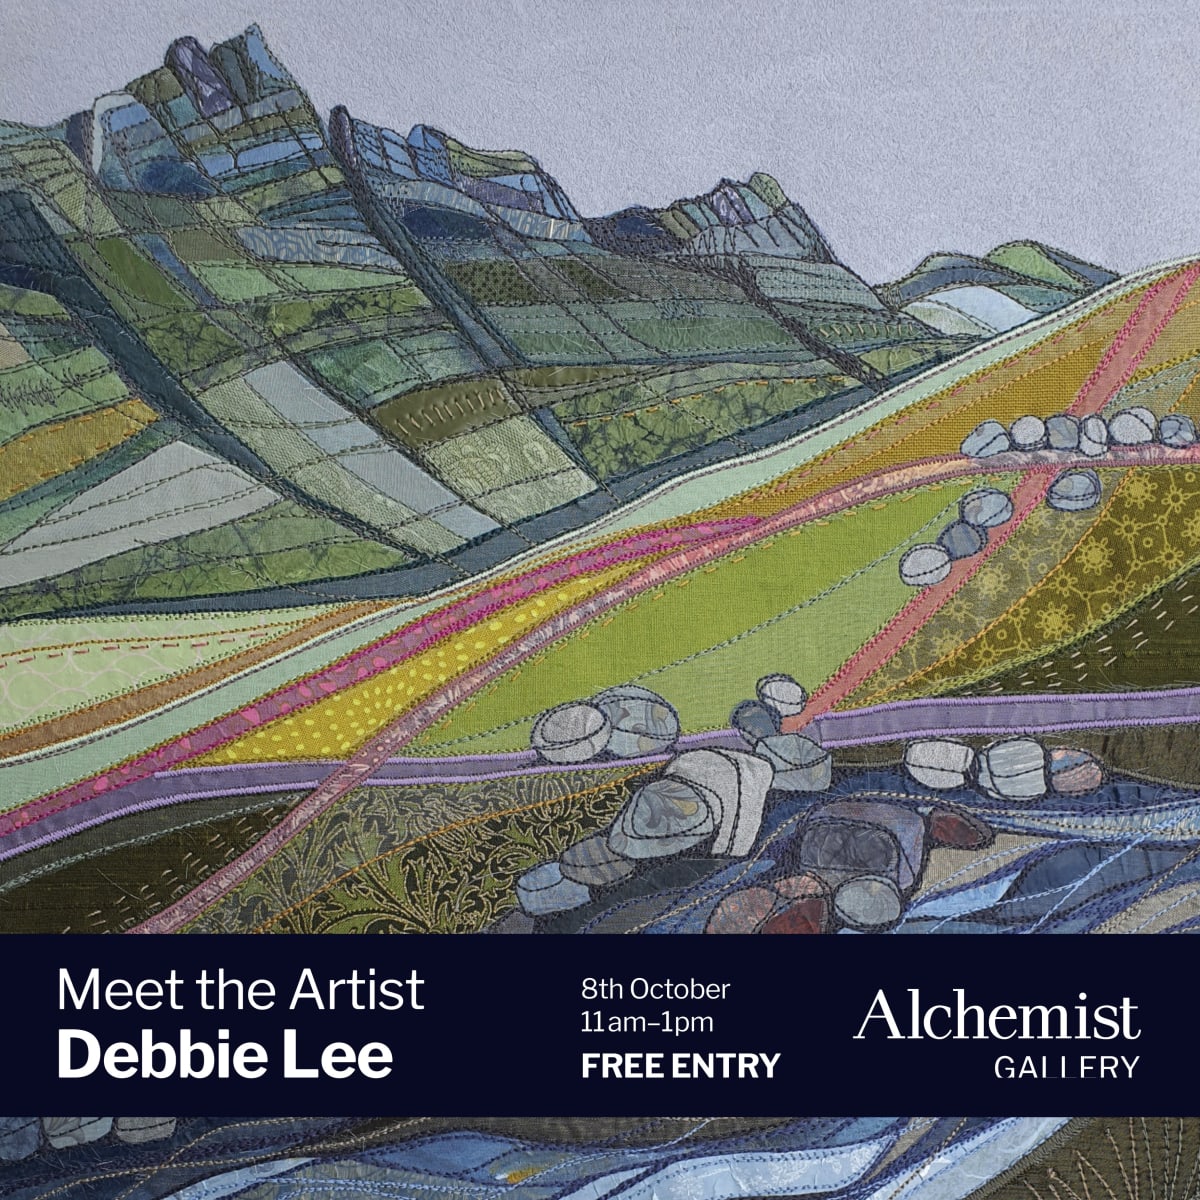 exhibition poster for The View From Where I Stand, Debbie Lee, featuring Liathach Lines by the artist